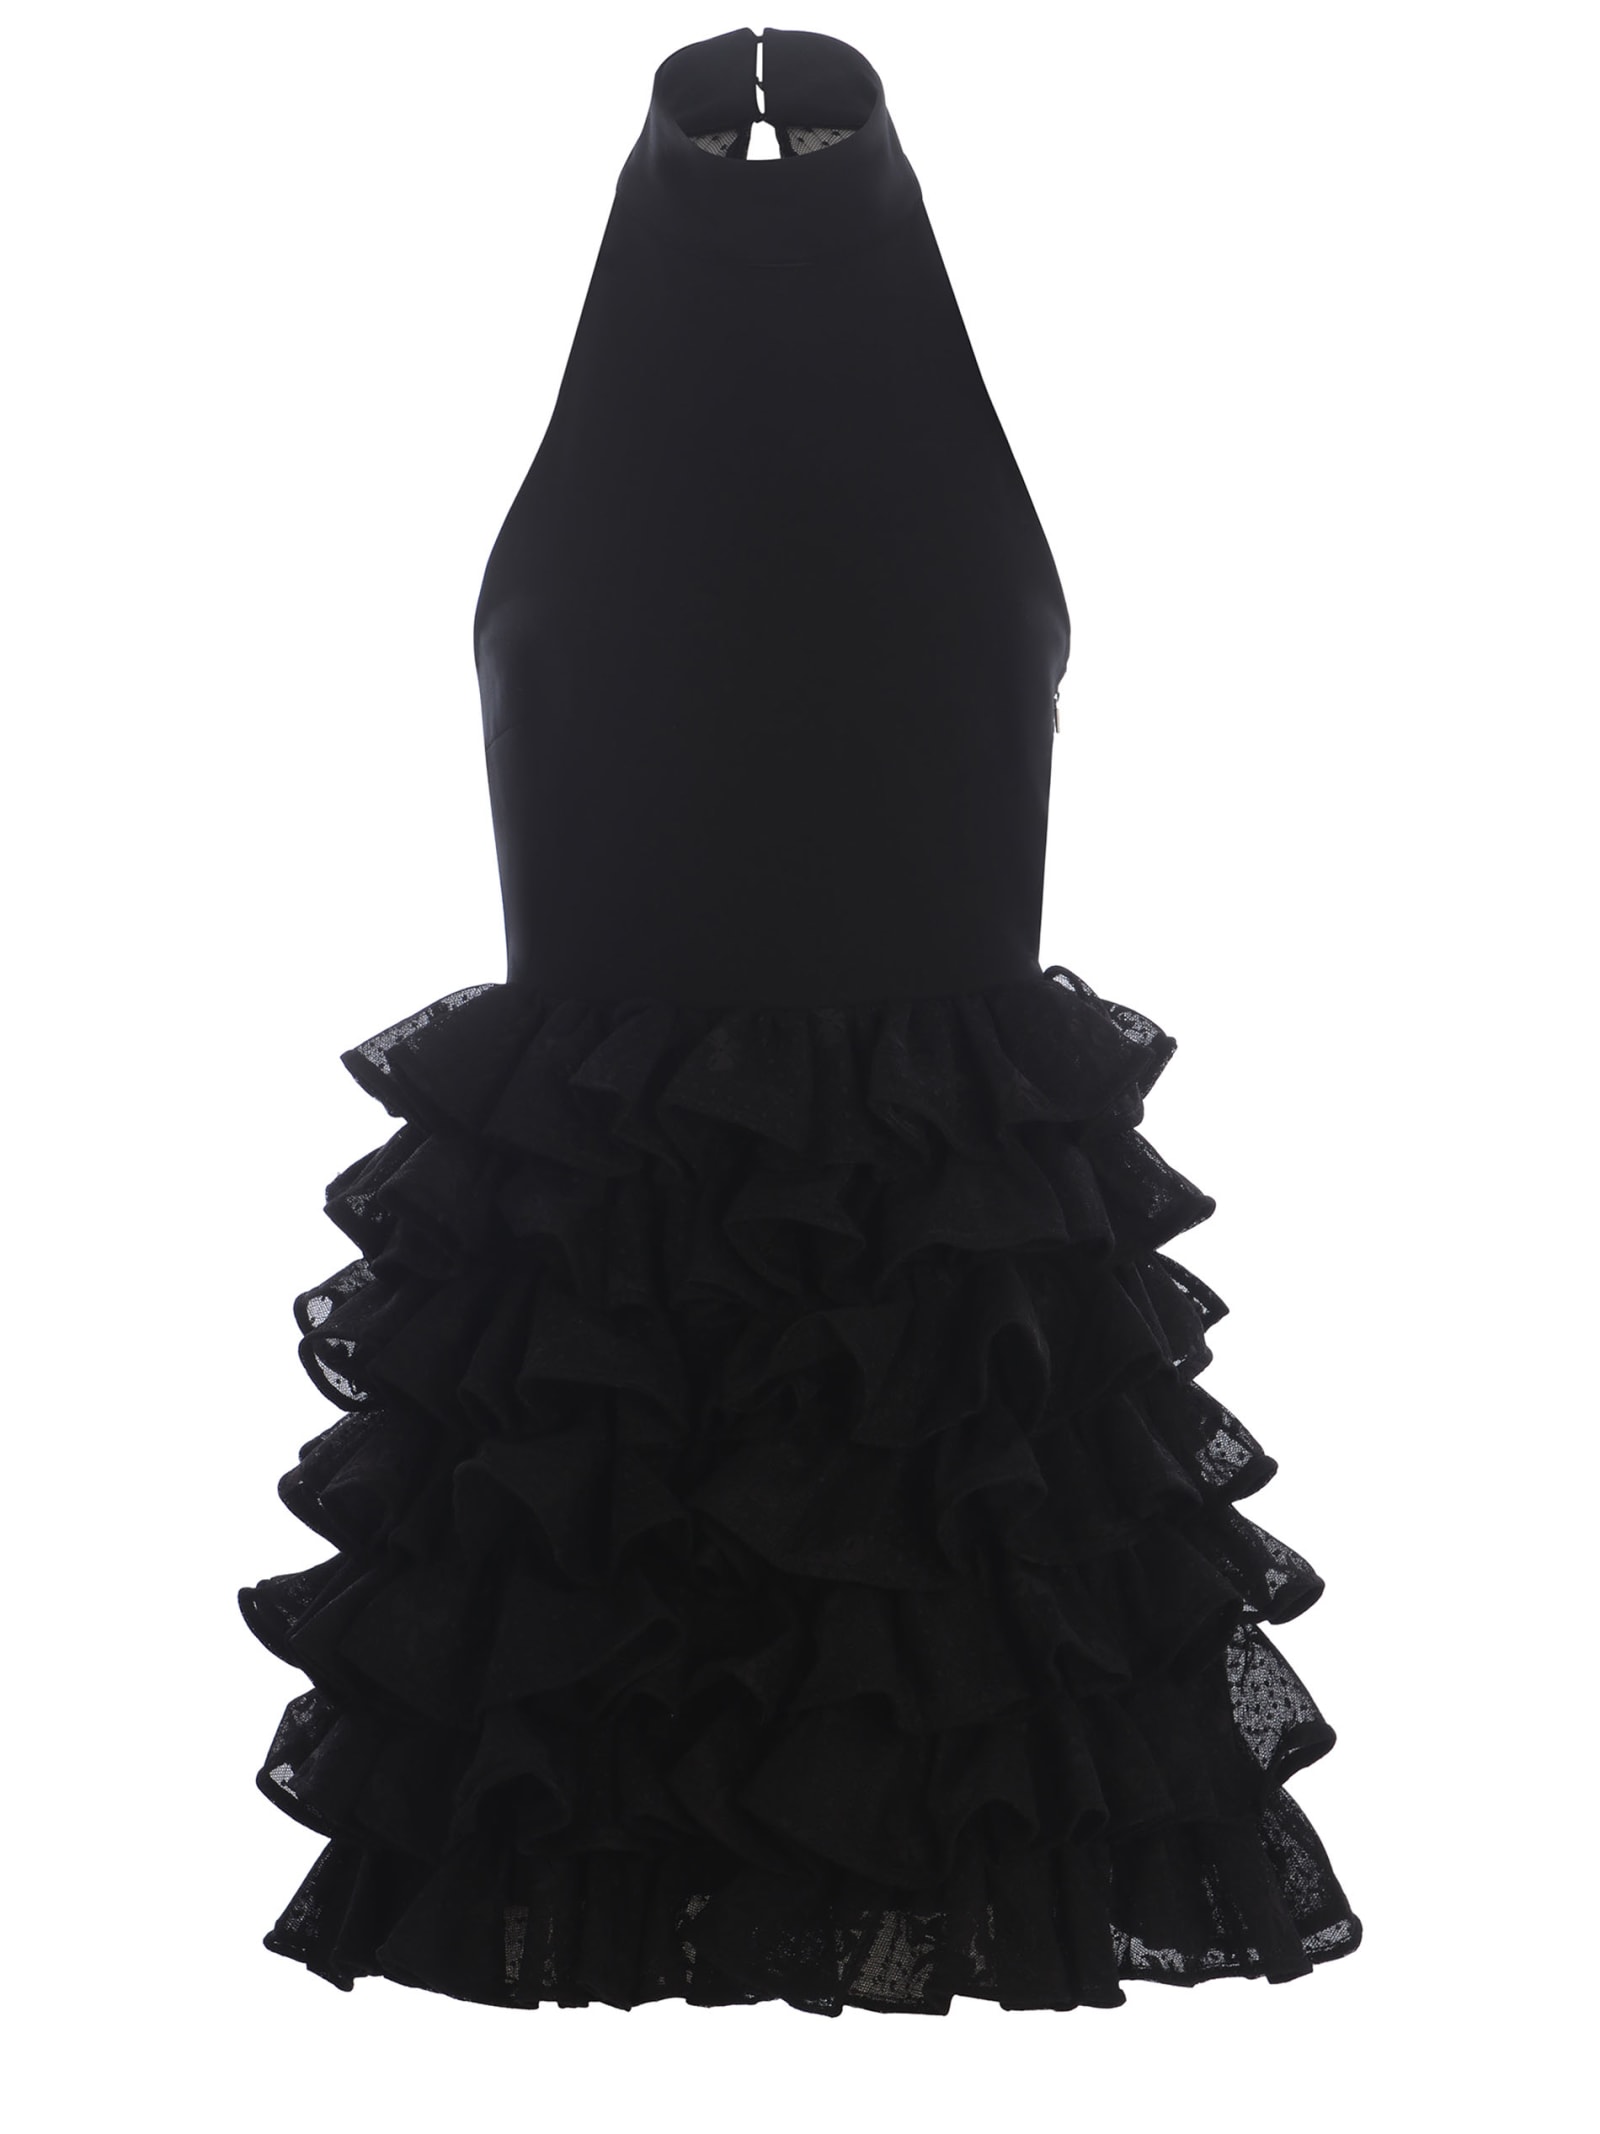 Shop Rotate Birger Christensen Dress Rotate Bow Made Of Viscose In Black